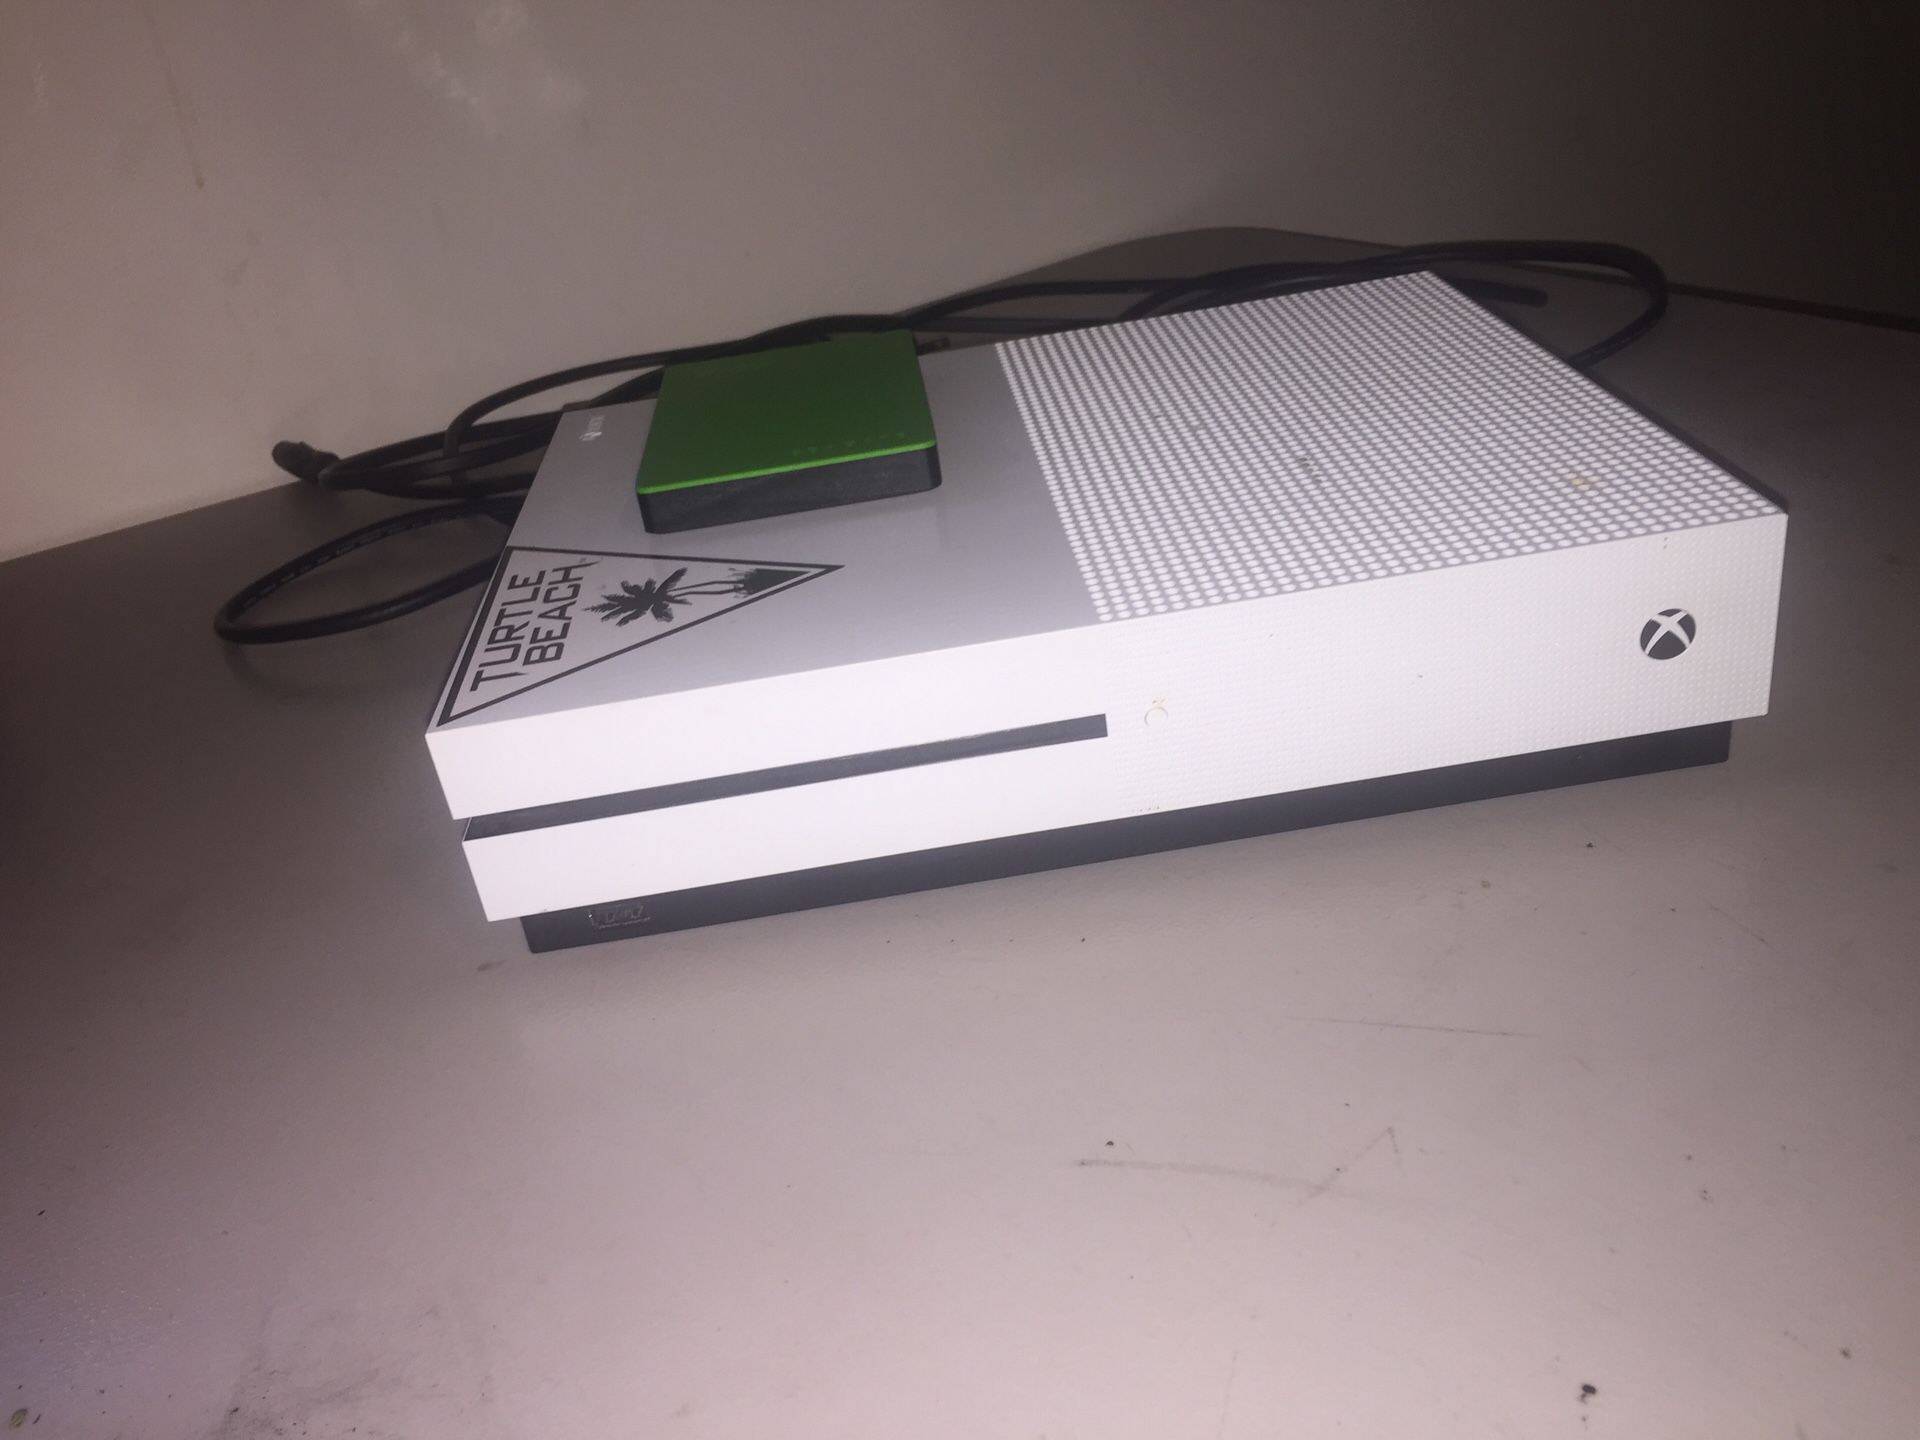 Xbox One S and 2 Tb expansion